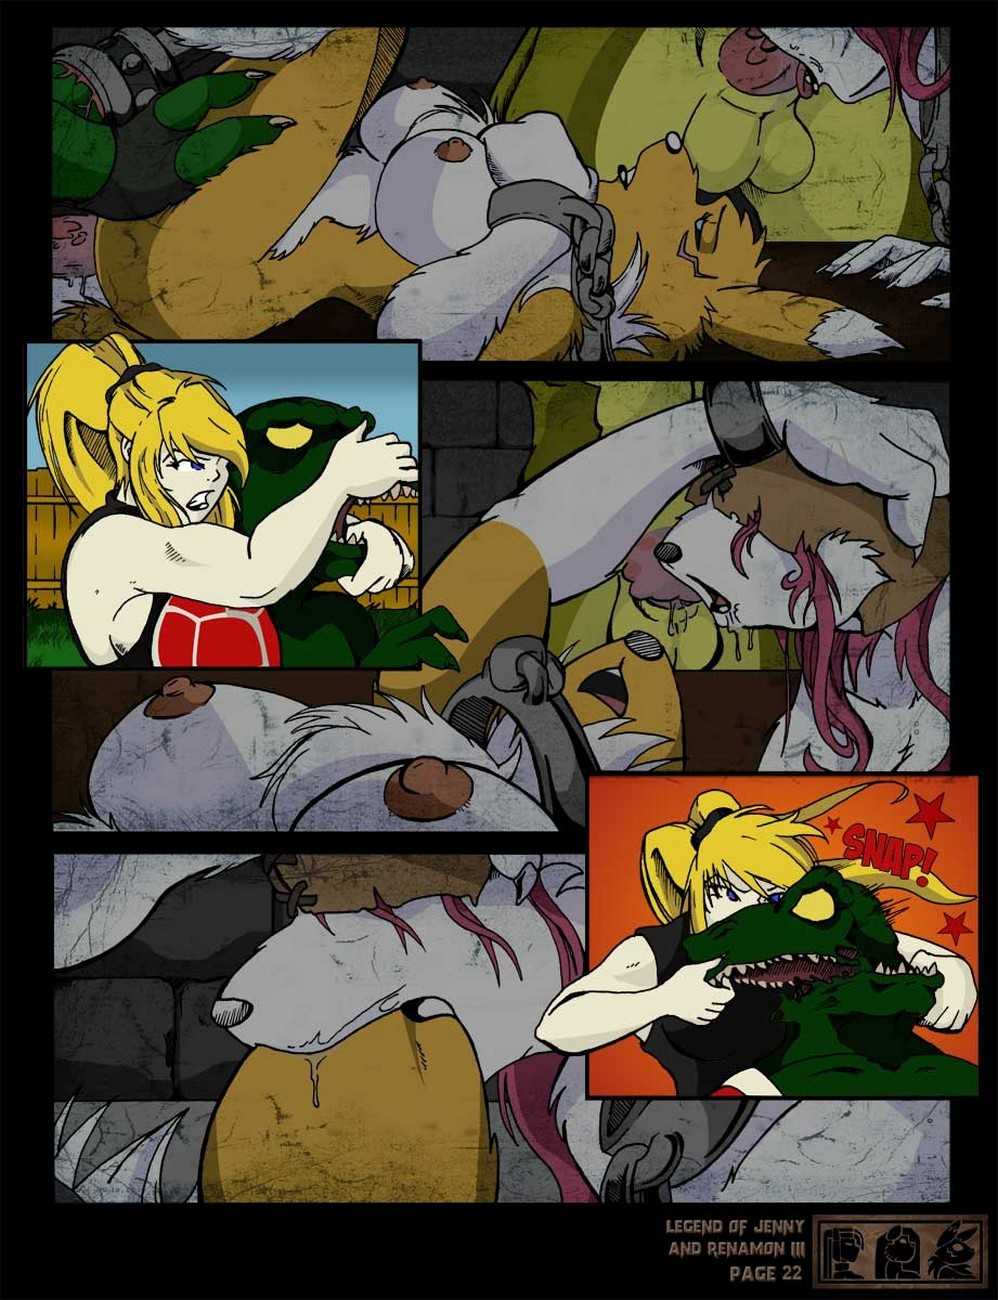 The Legend Of Jenny And Renamon 3 page 23